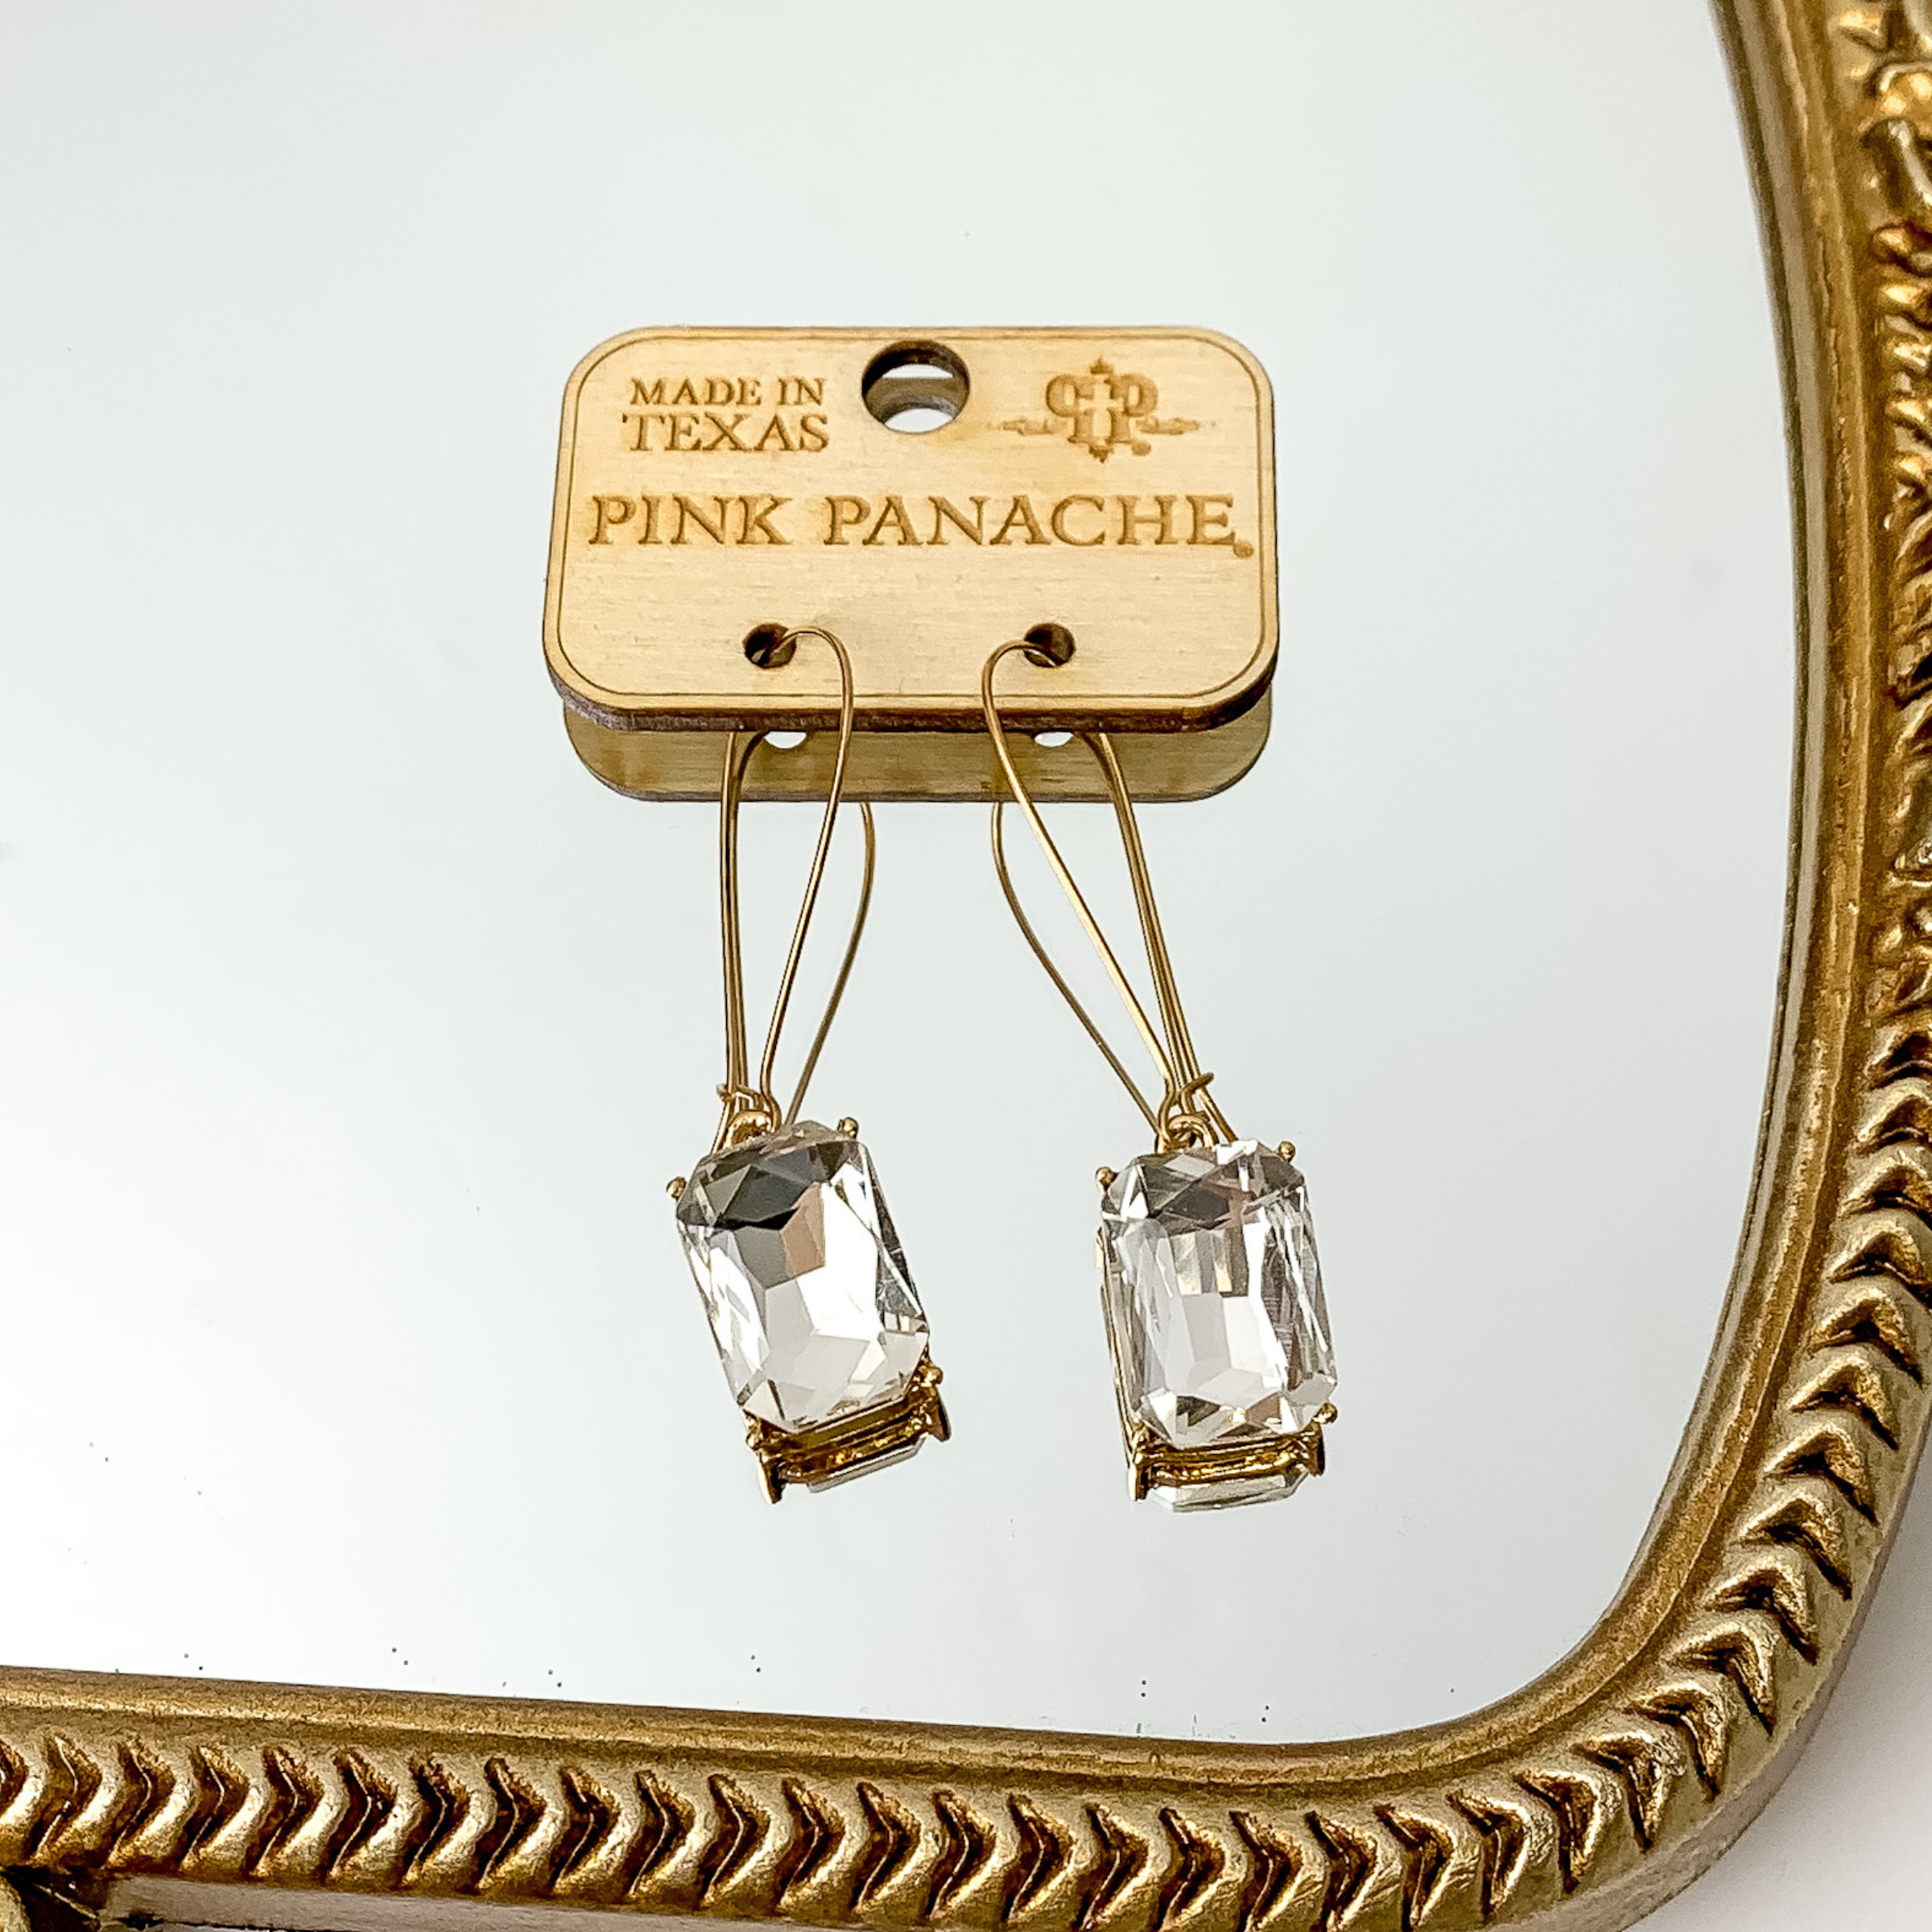 Gold kidney wire earrings with a rectangle, clear crystal charm. These earrings are pictured on a mirror.